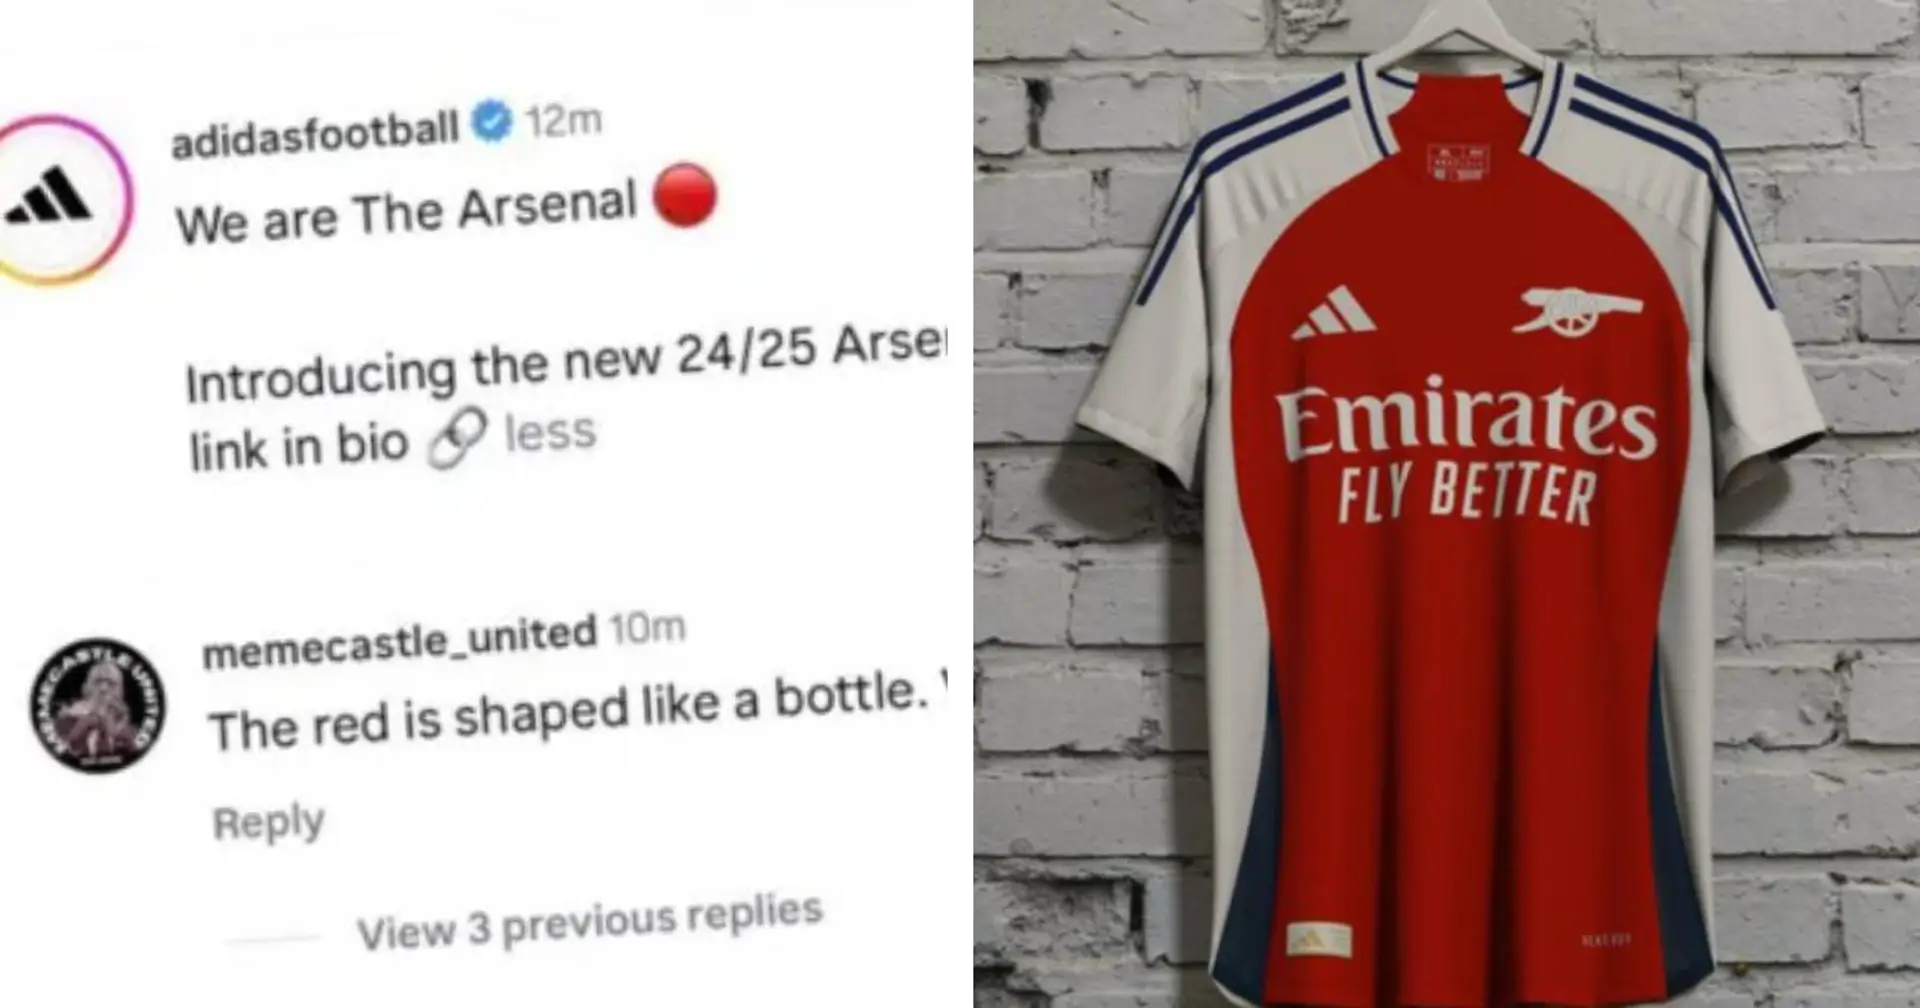 Arsenal home kit mercilessly trolled for 'looking like a bottle', Adidas react 